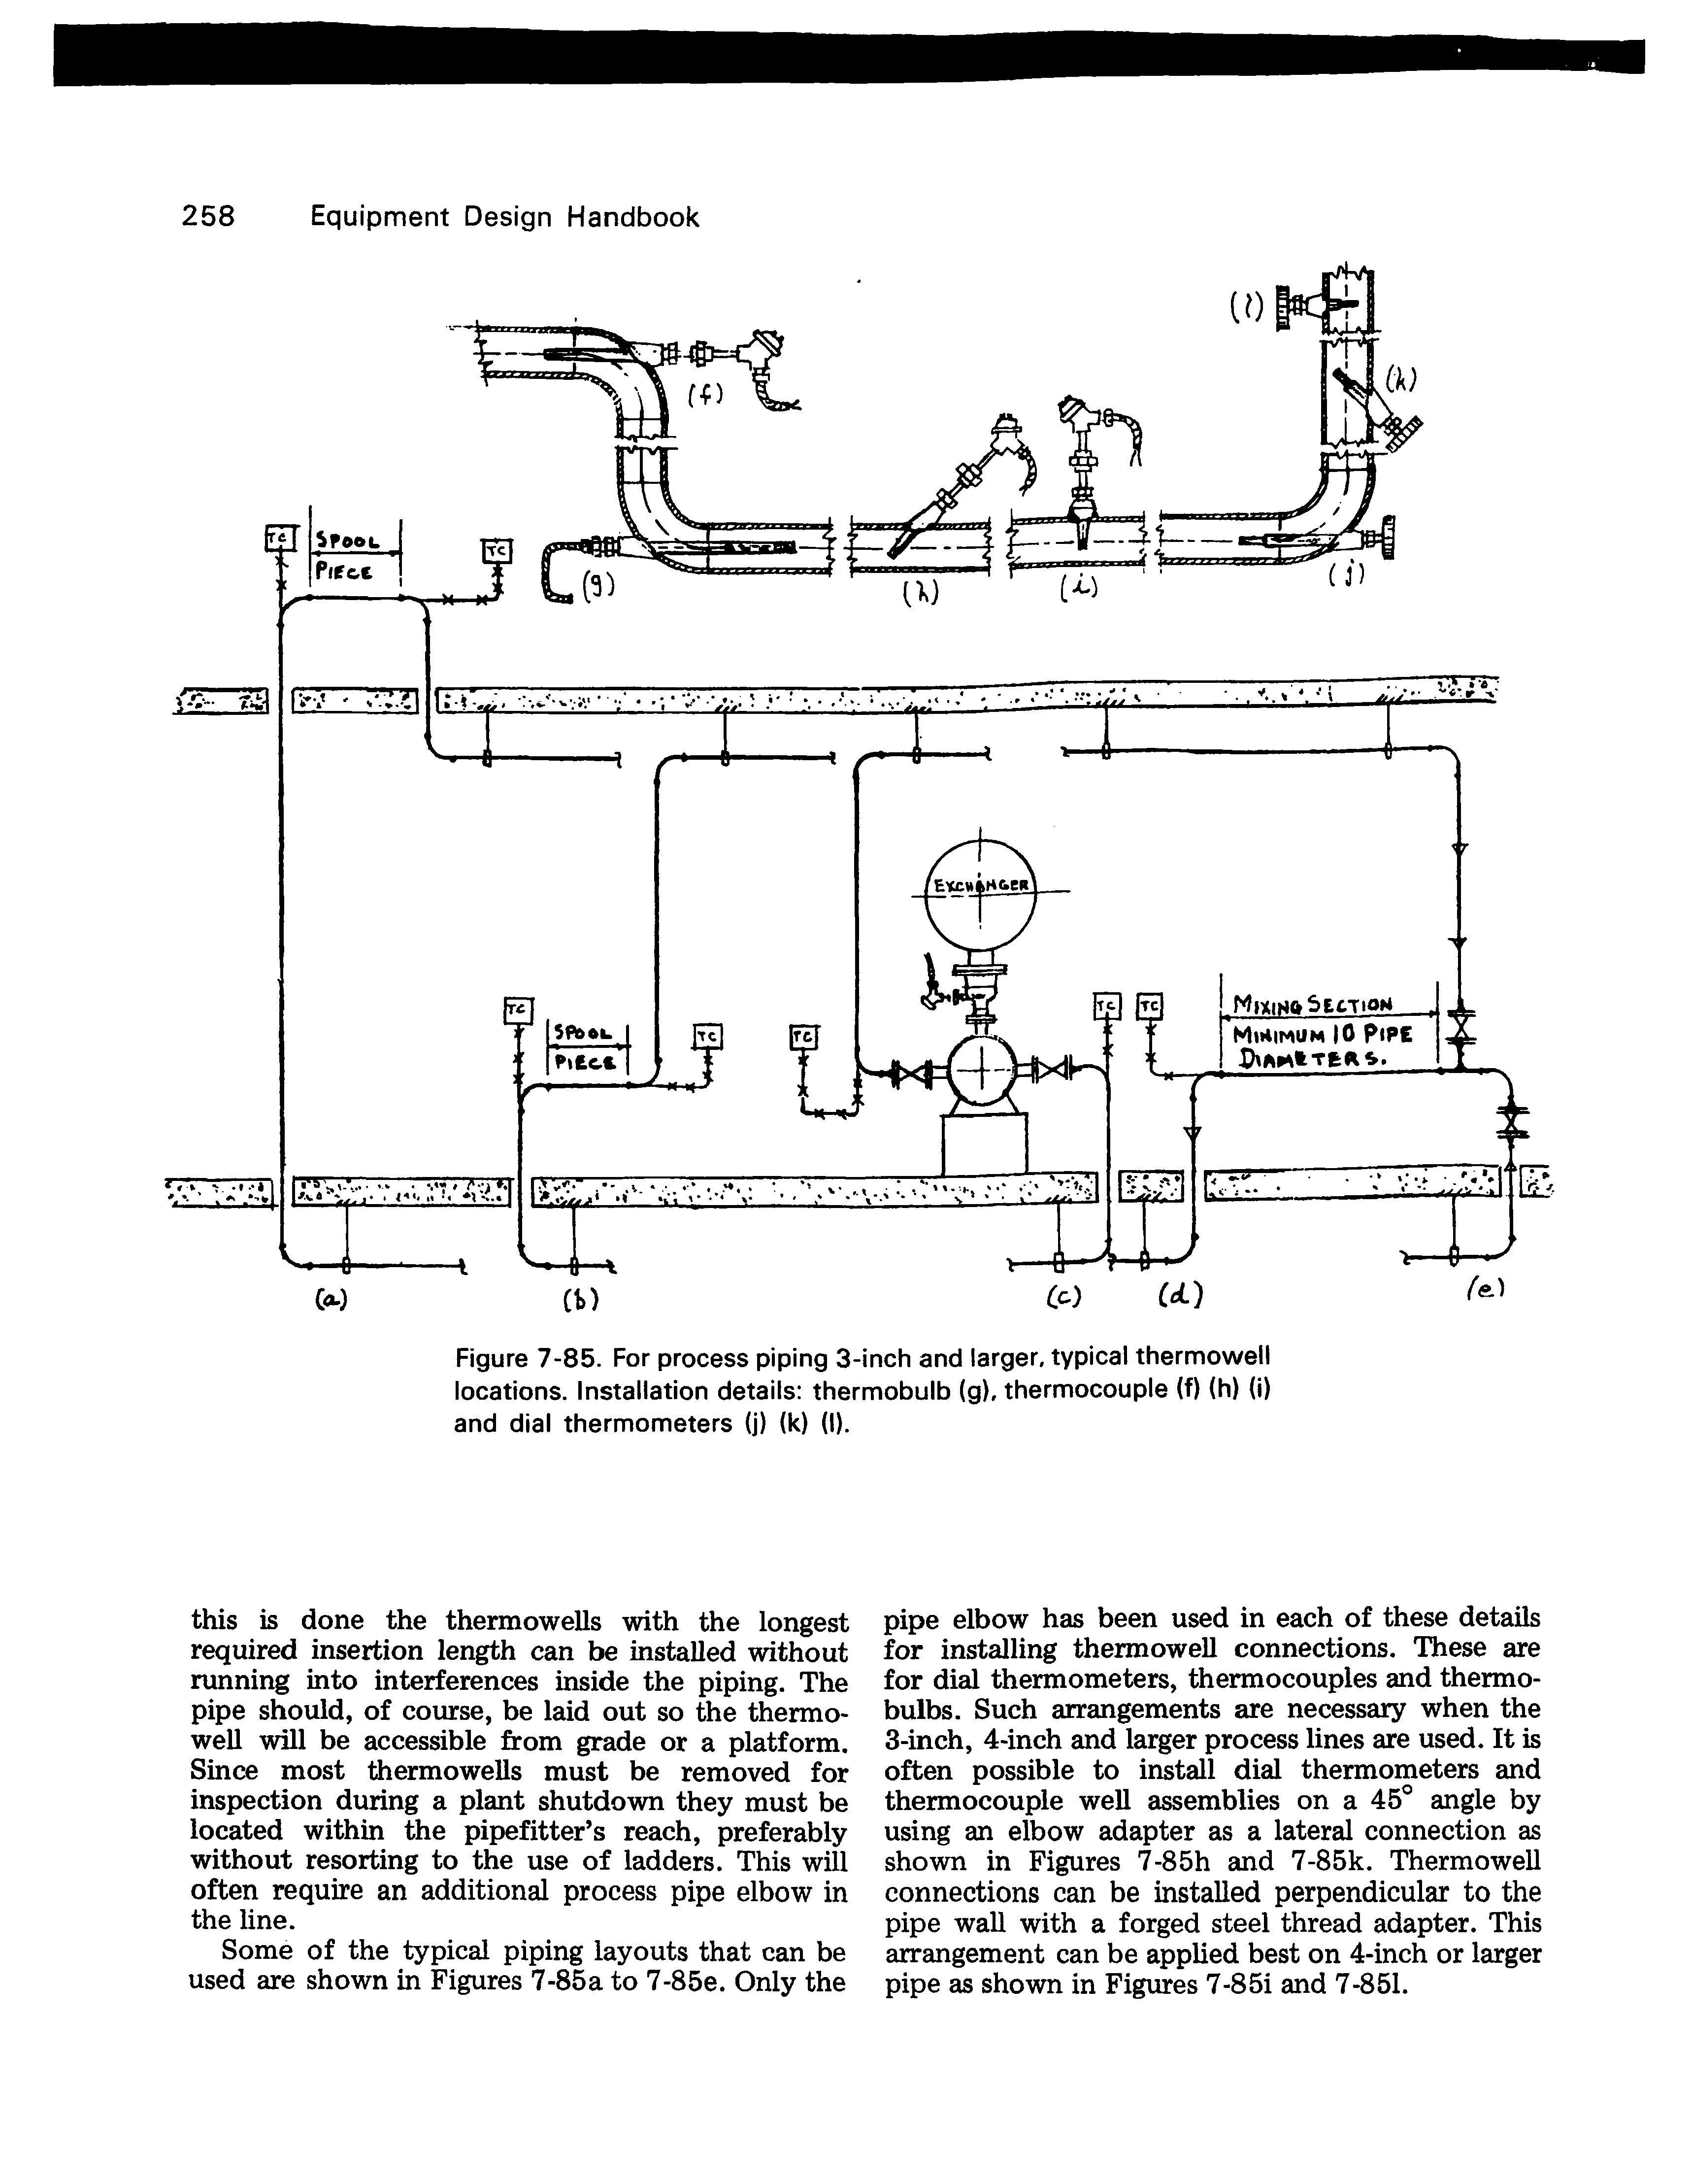 Figure 7-85. For process piping 3-inch and larger, typical thermowell locations. Installation details thermobulb (g), thermocouple (f) (h) (i) and dial thermometers (j) (k) (I).